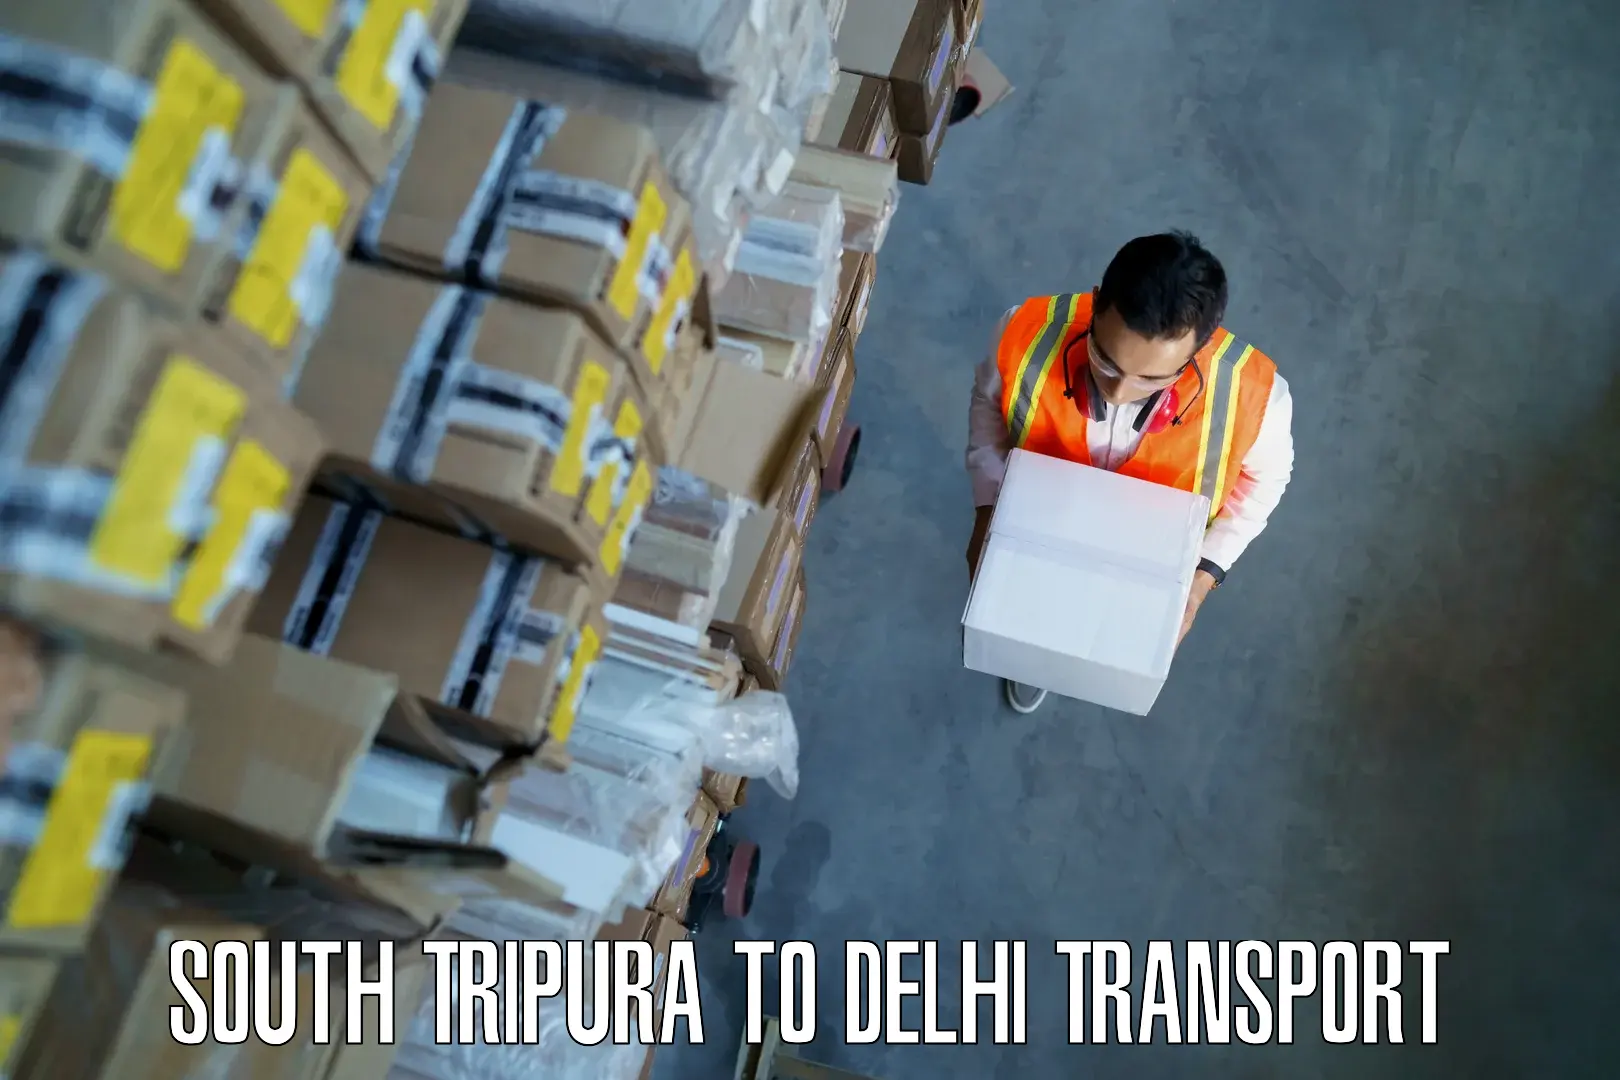 Cargo train transport services South Tripura to Lodhi Road